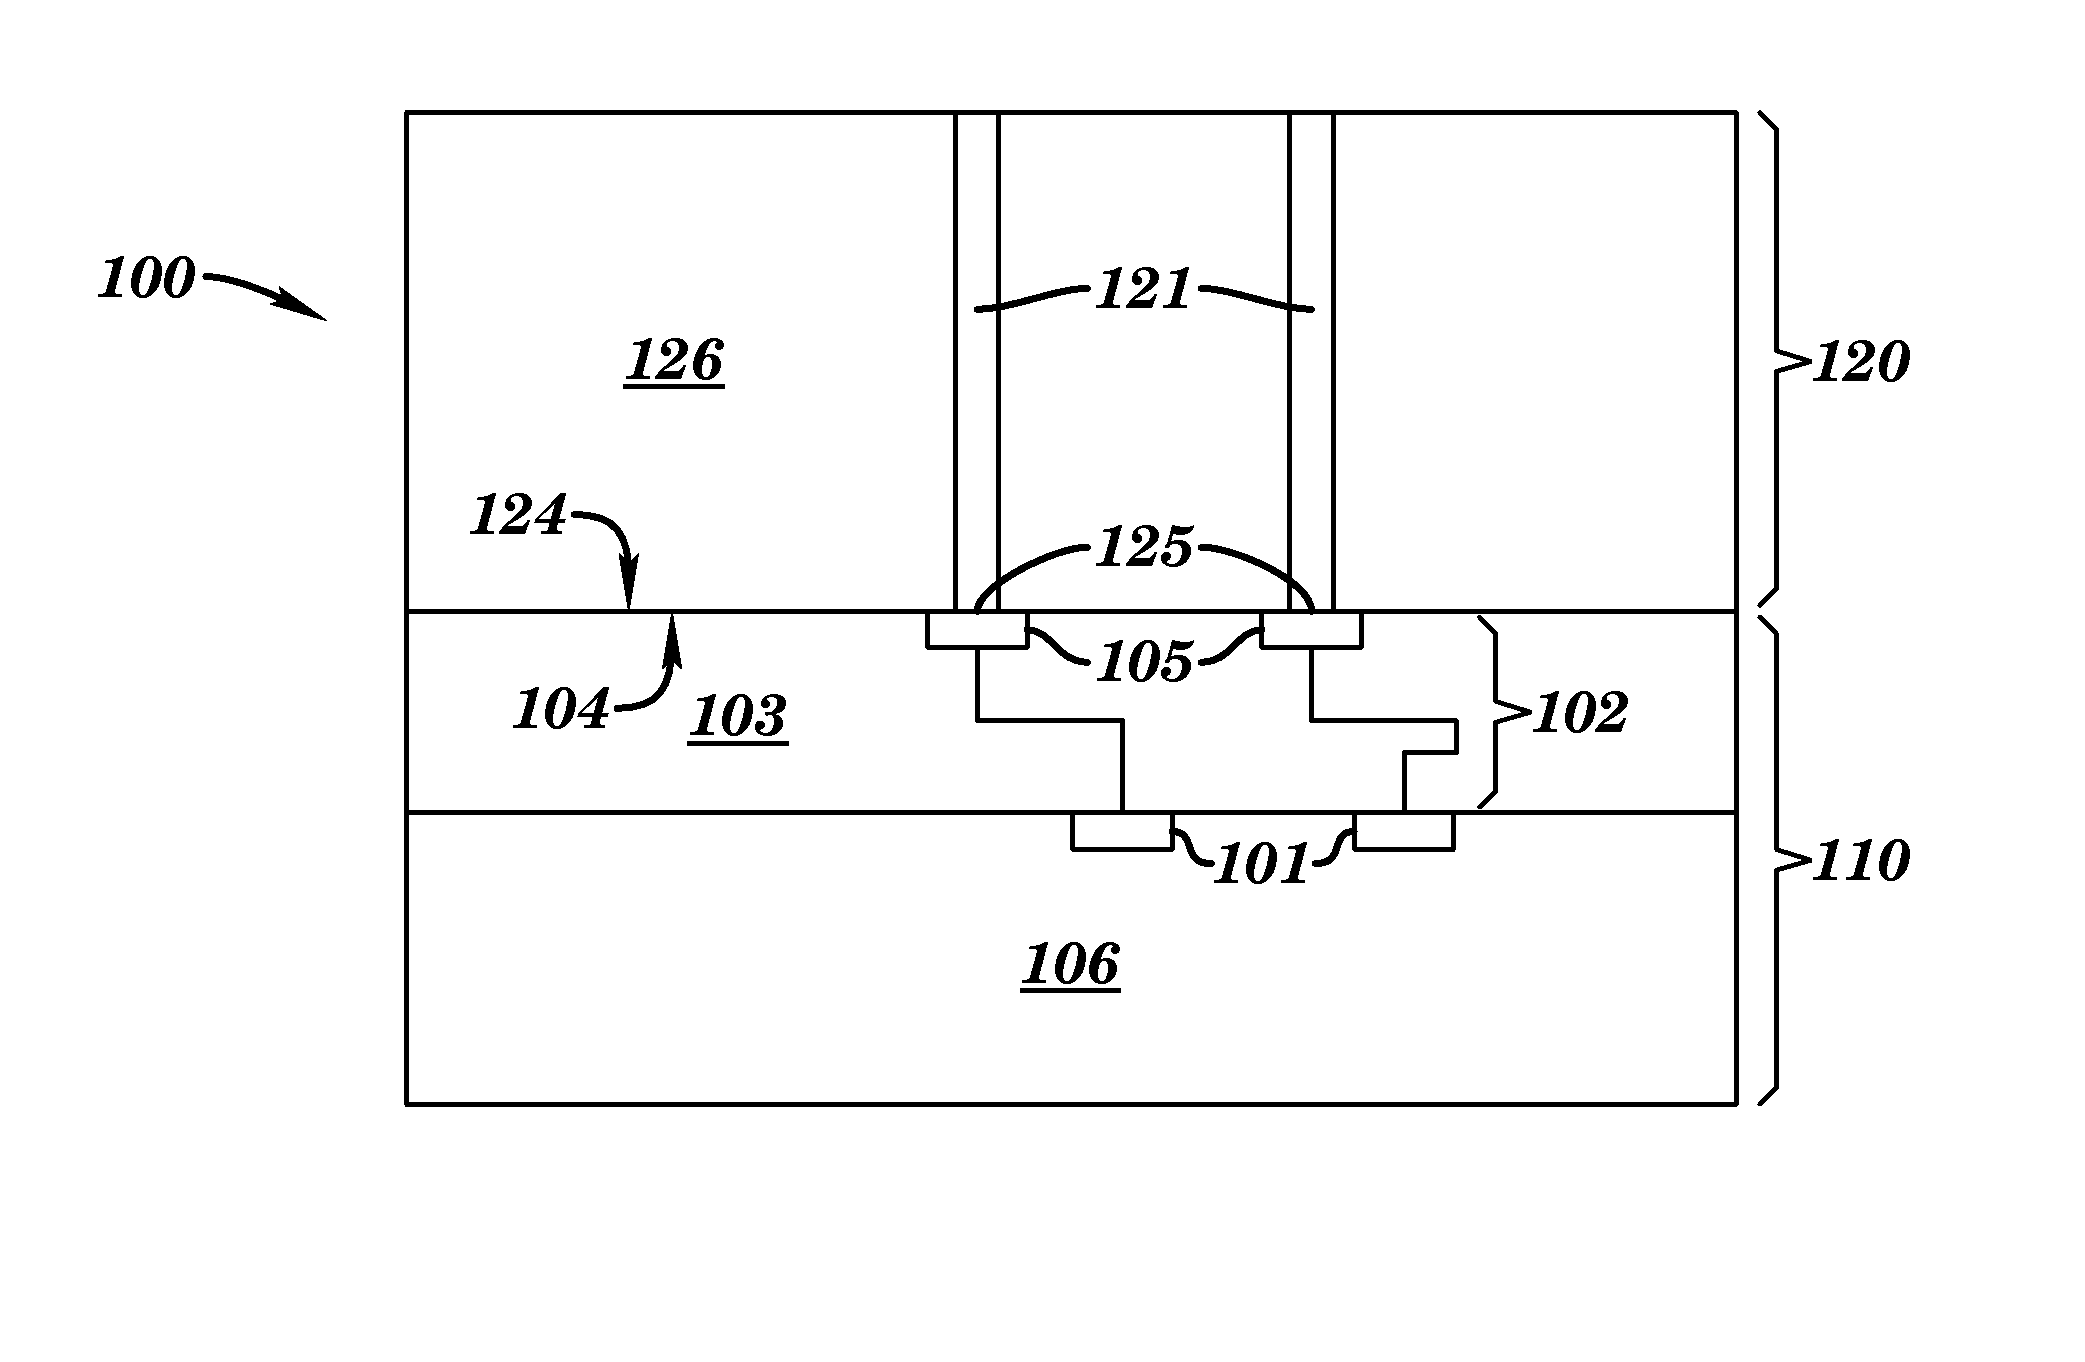 Metal to metal bonding for stacked (3D) integrated circuits